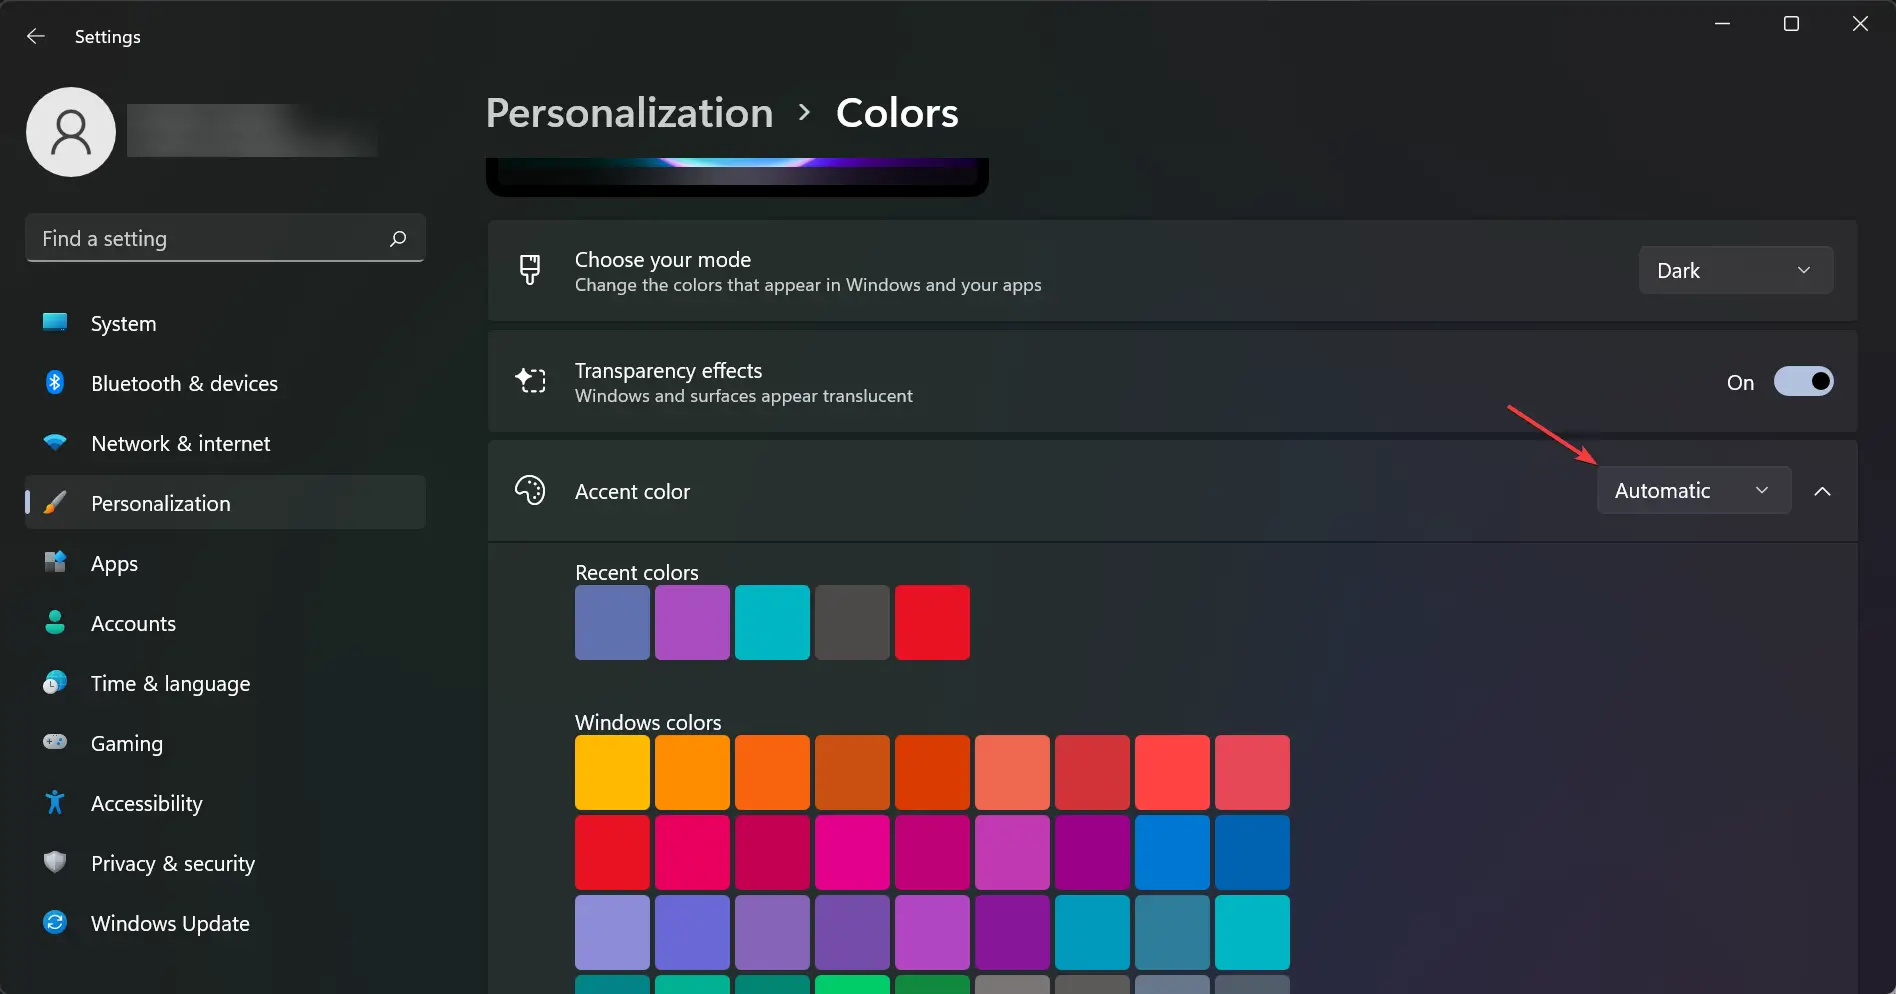 Accent color option and set it to Automatic